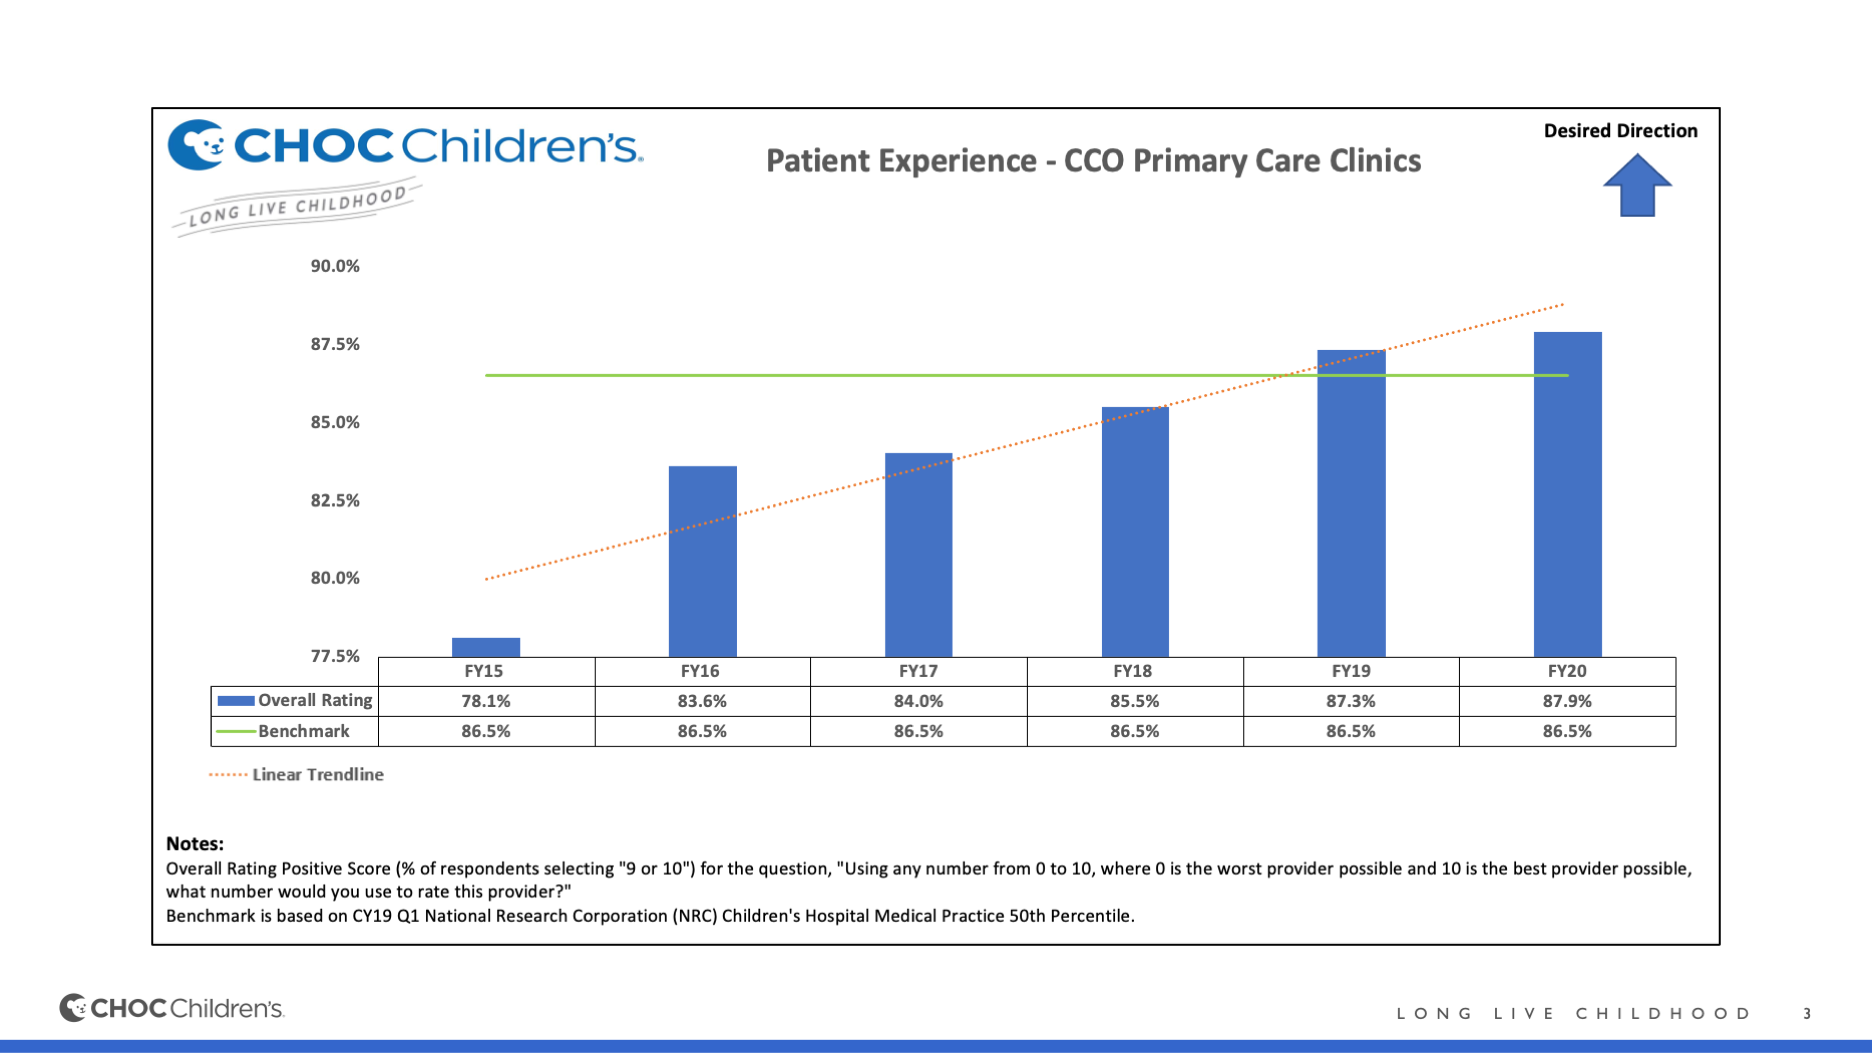 Patient Experience - CCO Primary Care Clinics